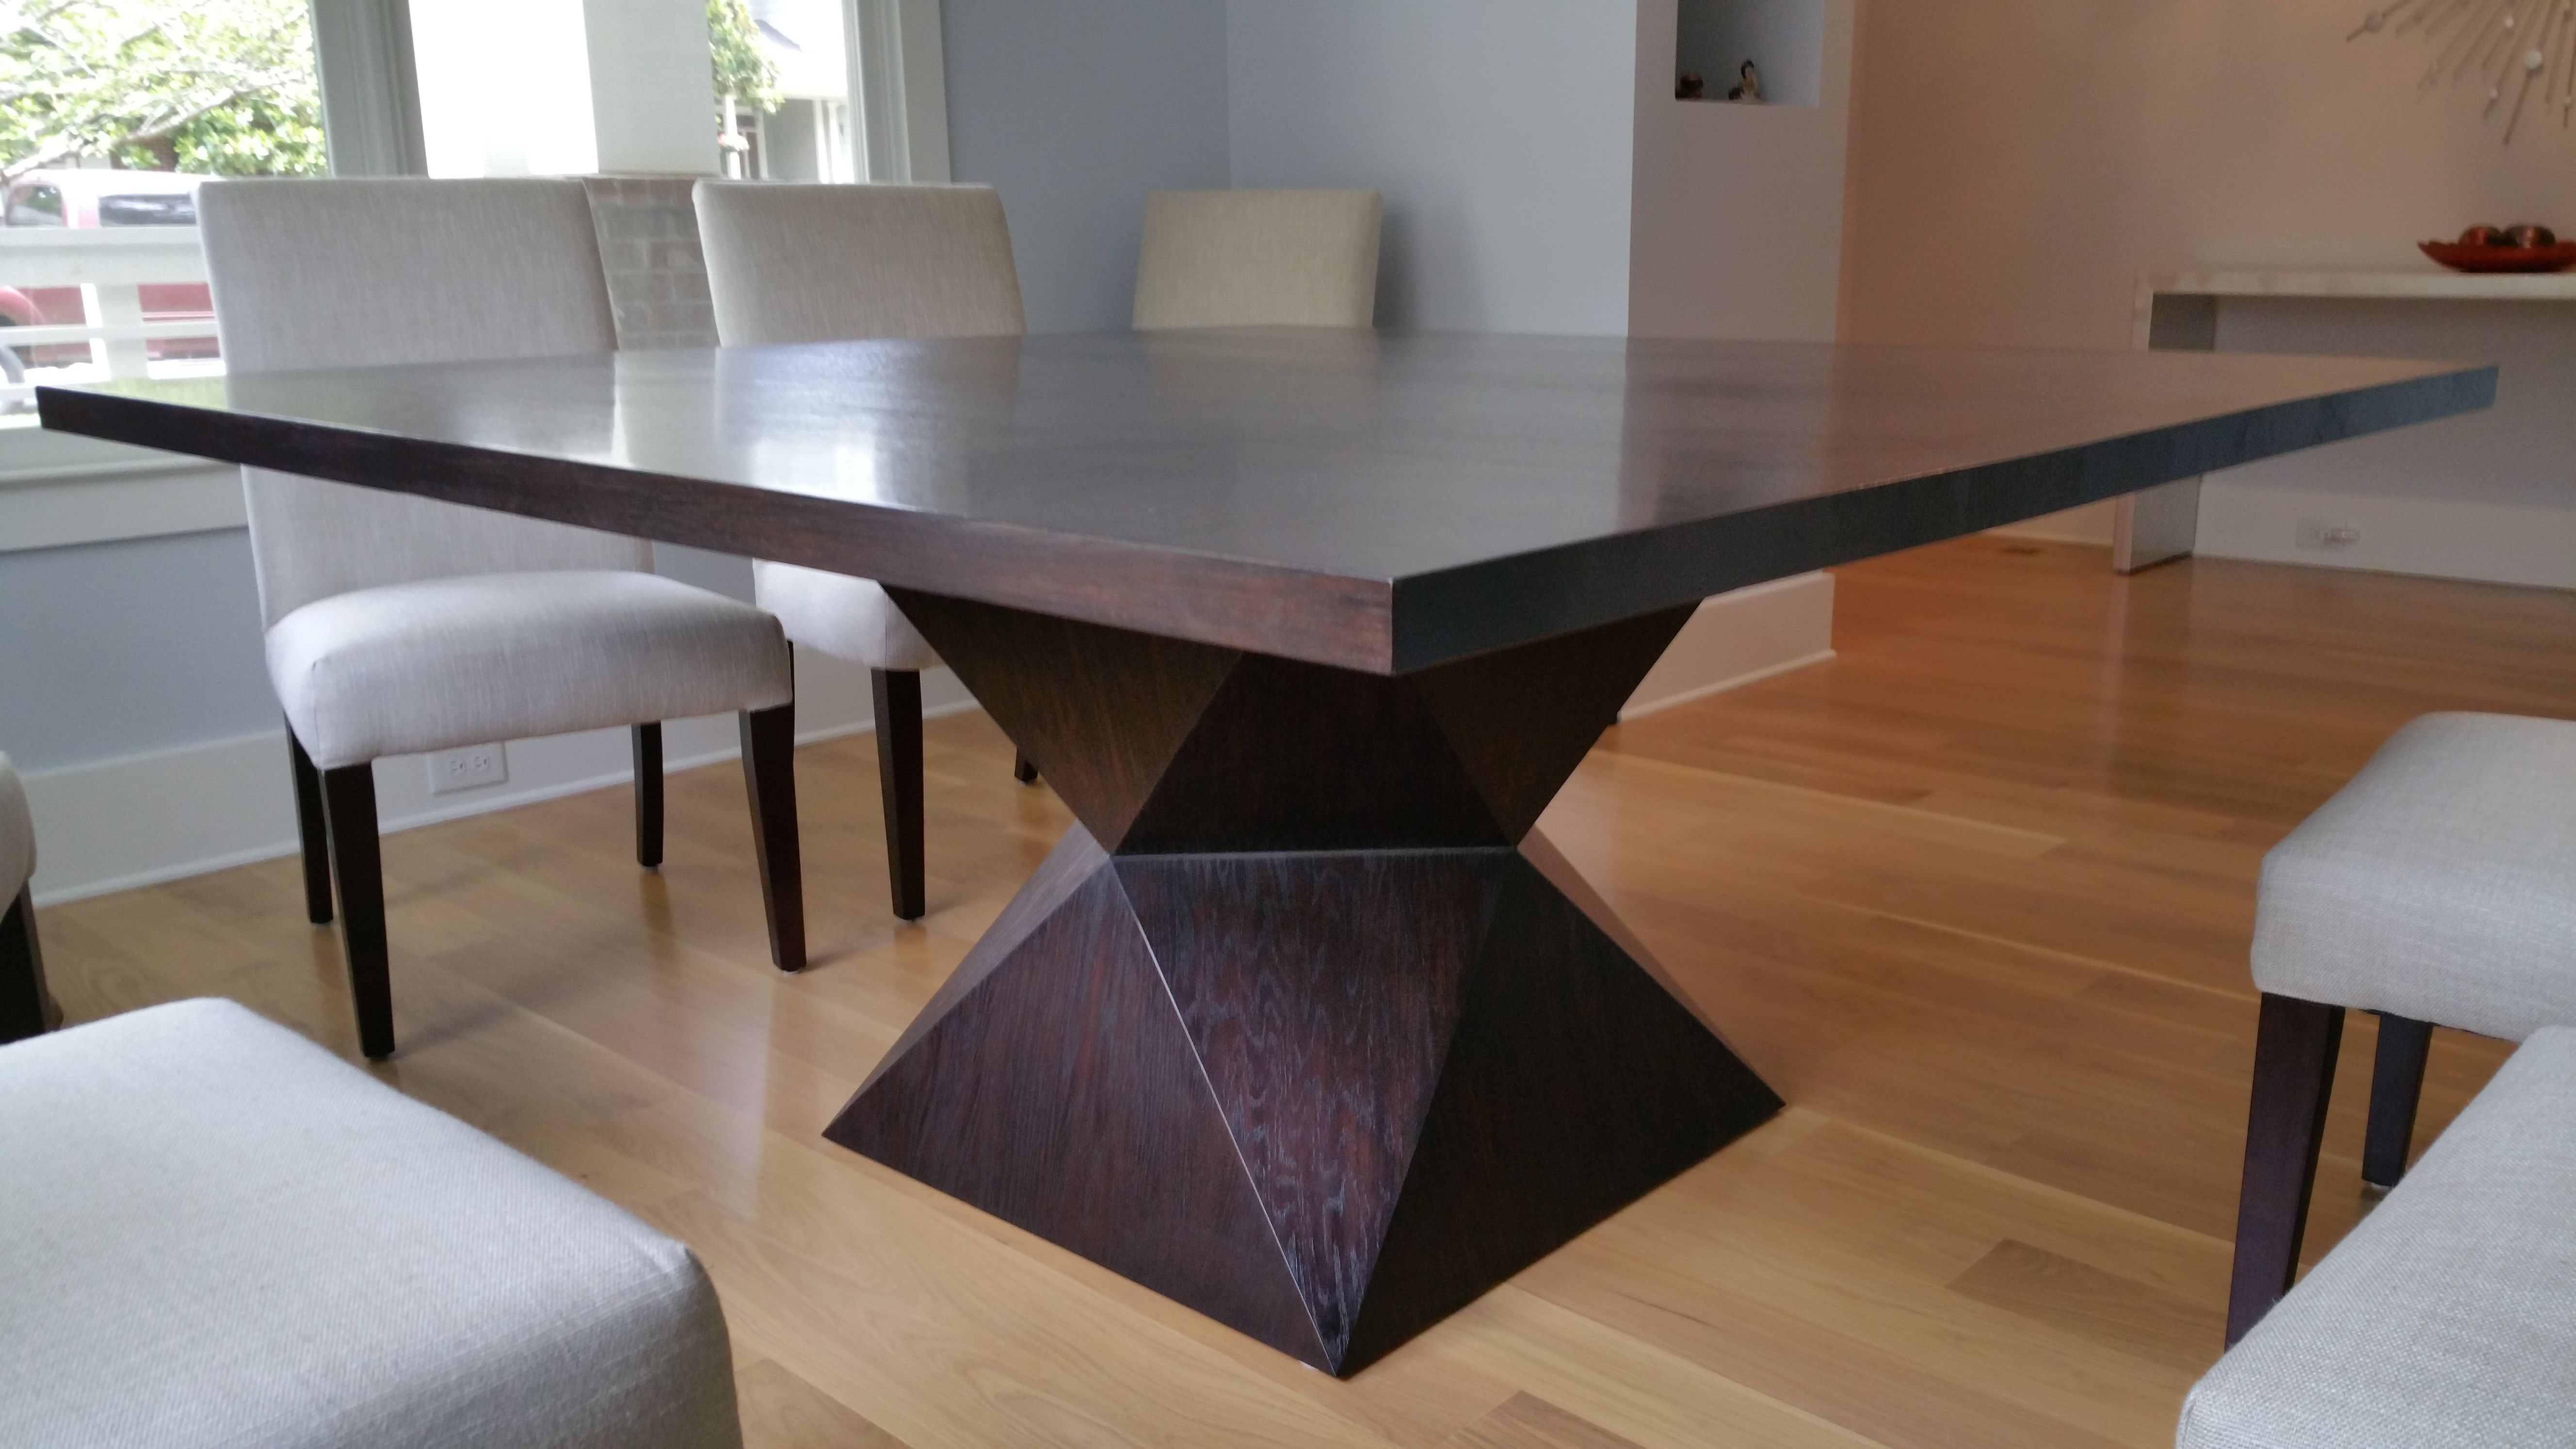 Hand Made Prism Pedestal Dining Table by Marco Bogazzi | CustomMade.com